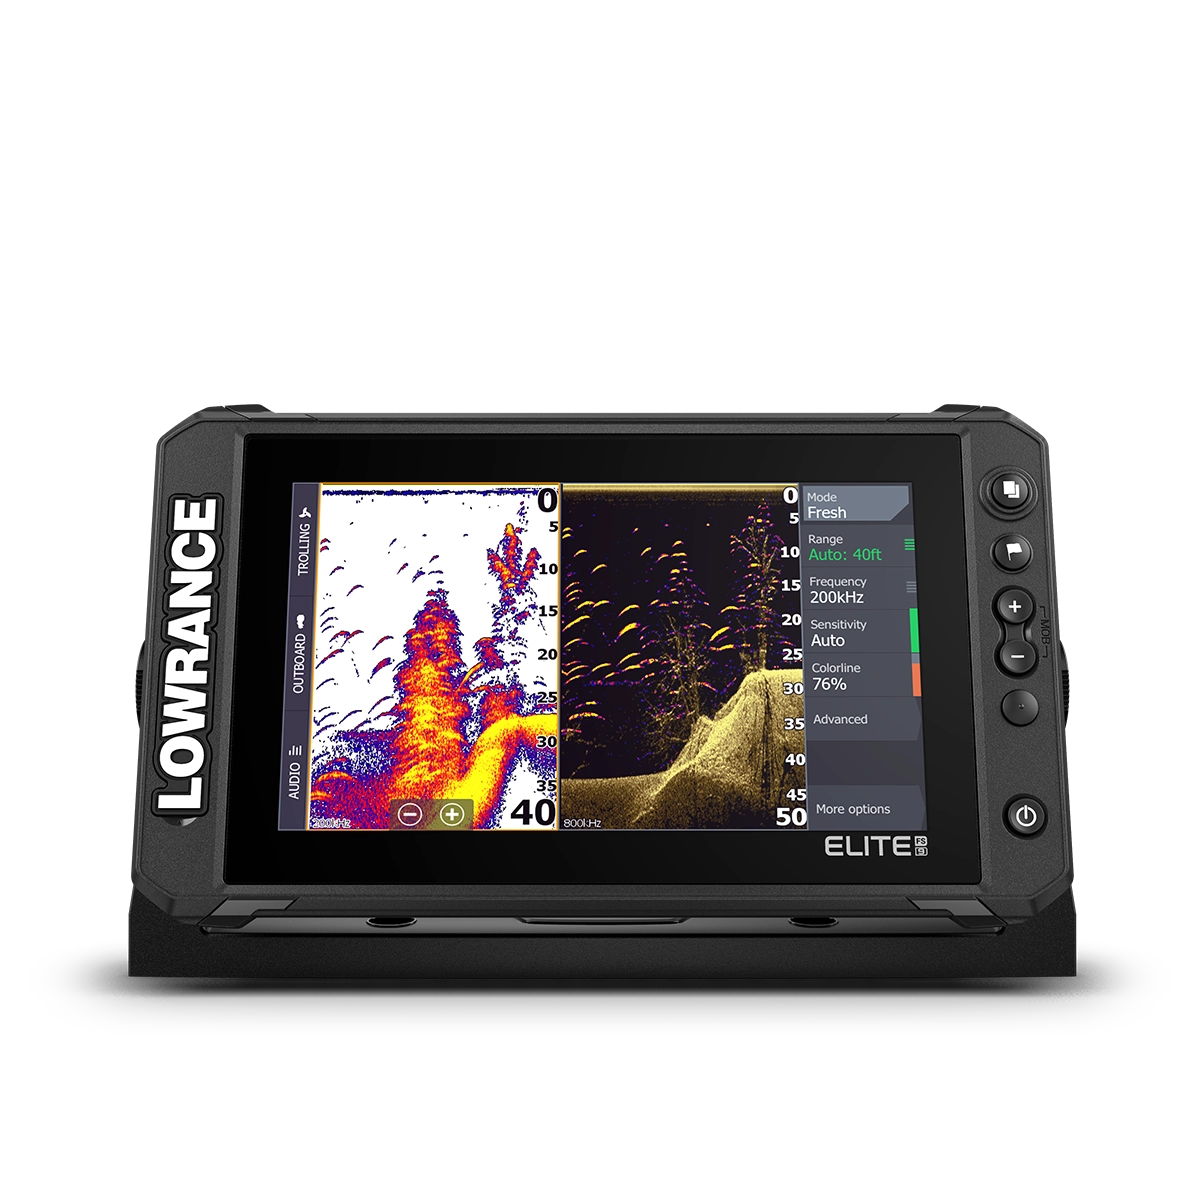 Lowrance ELITE FS 9 front view